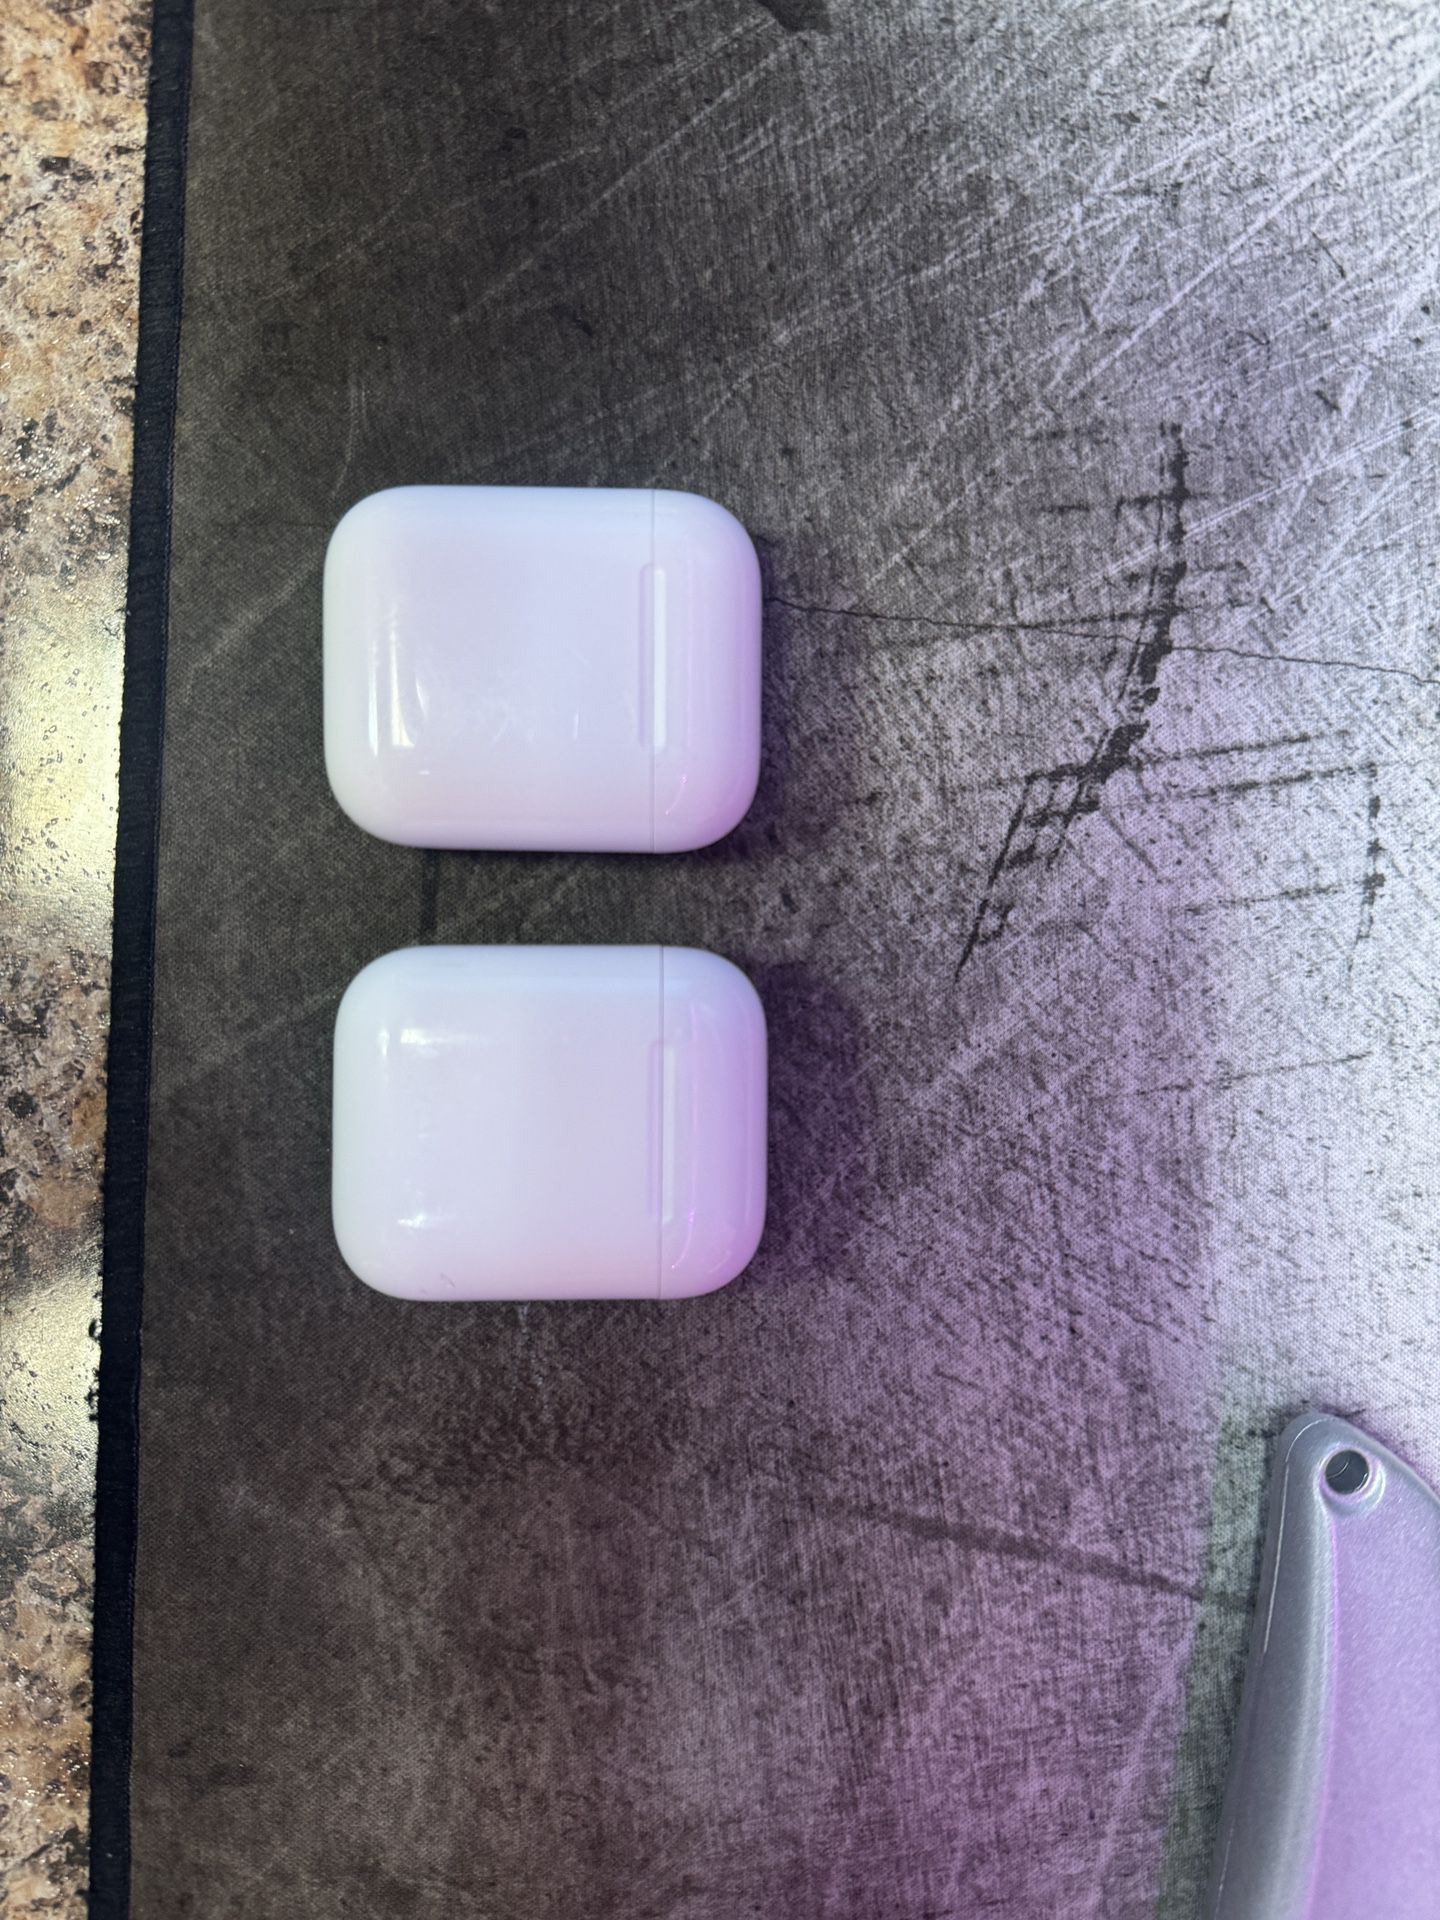 AirPod Charging Cases